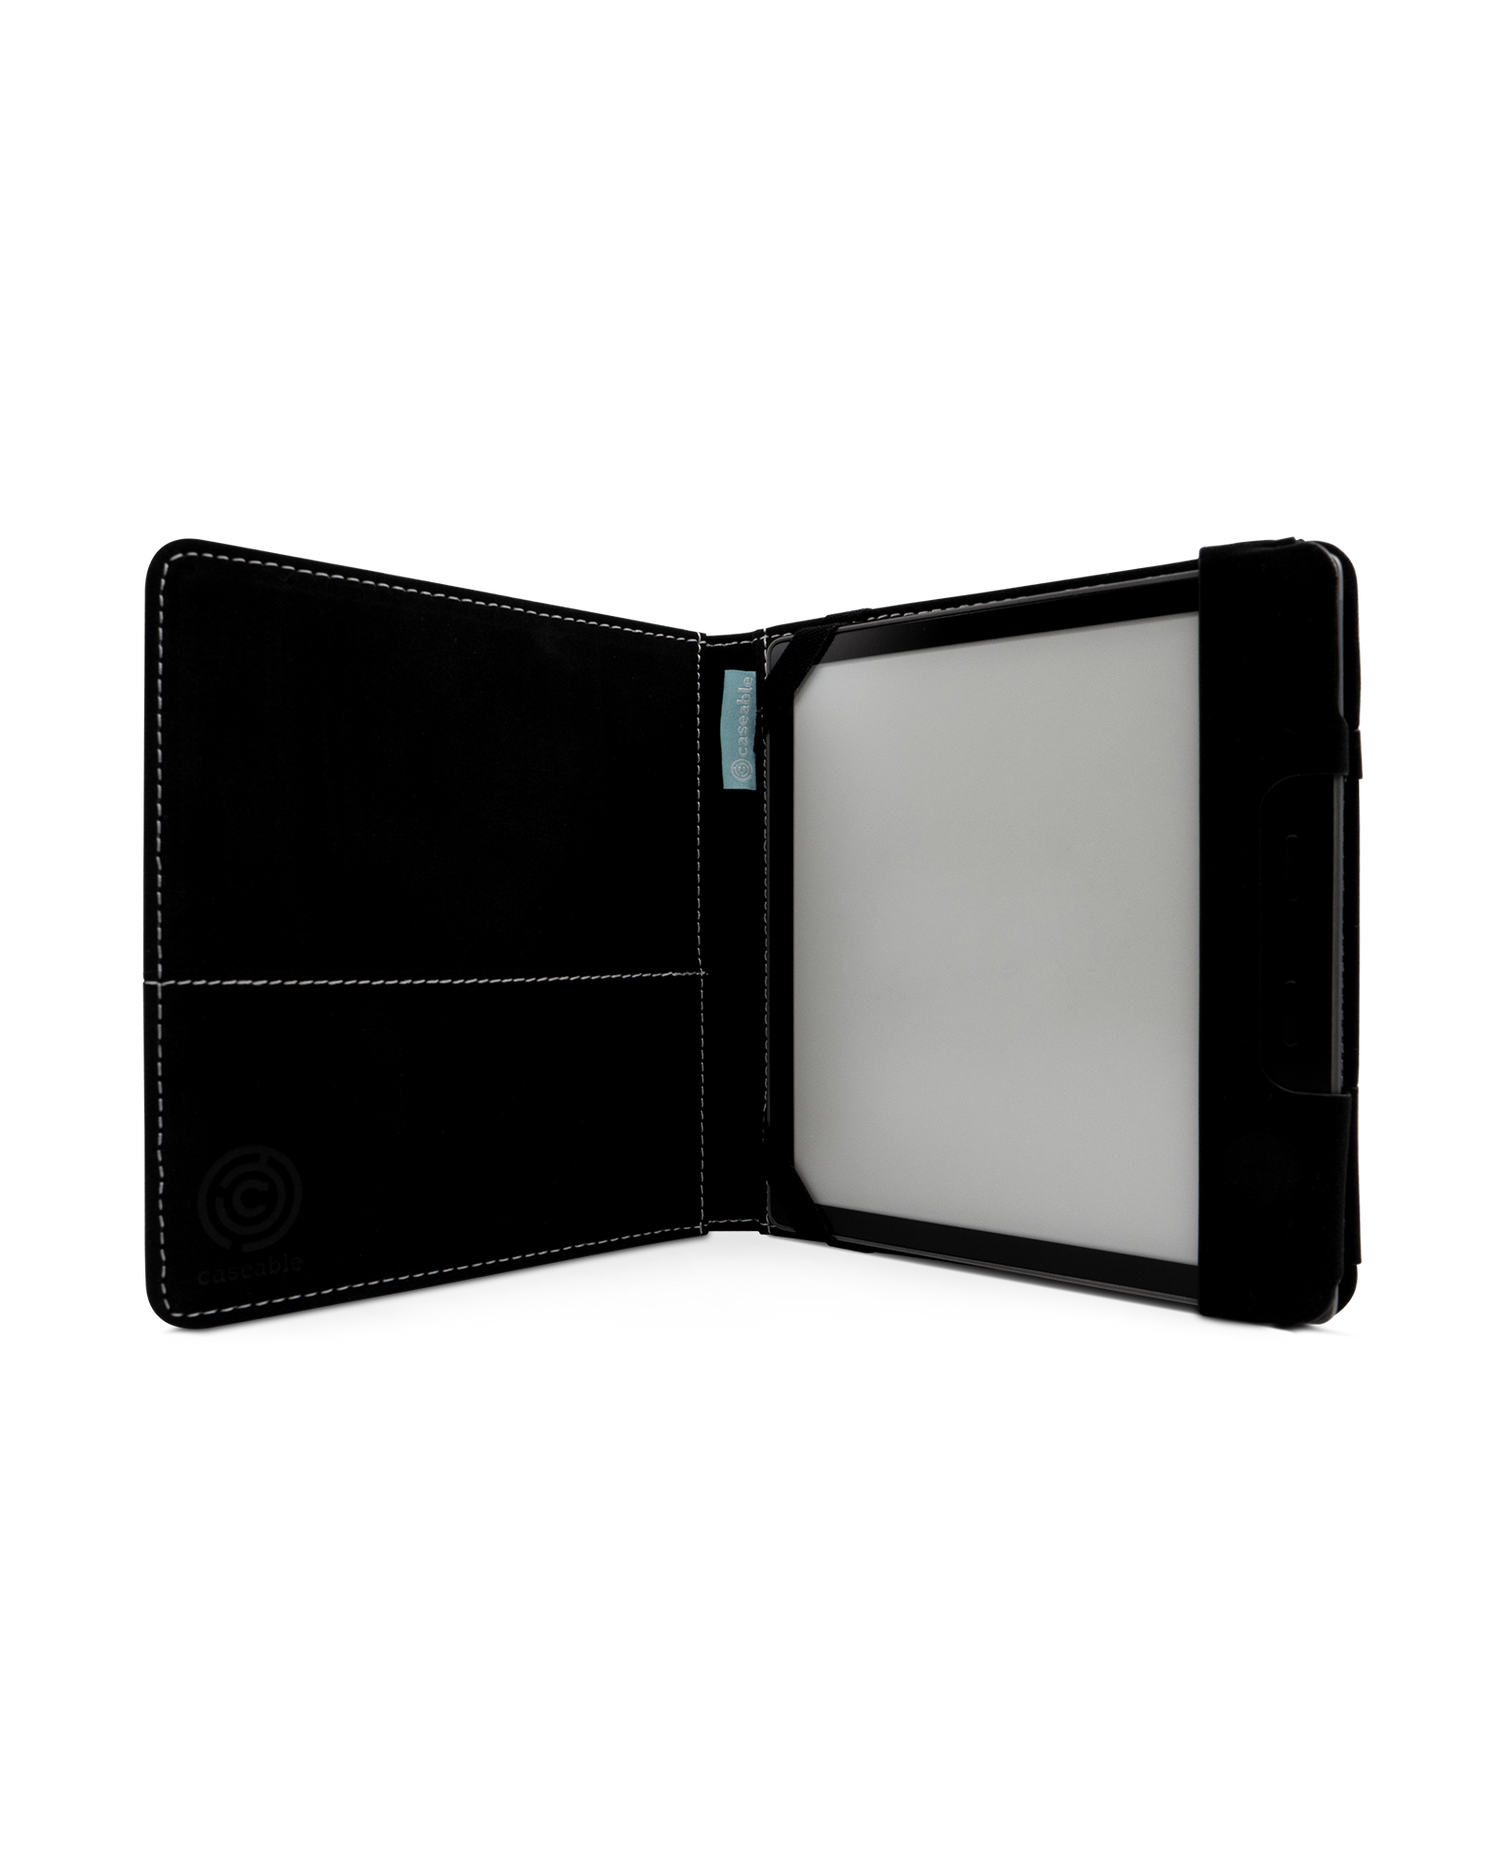 Night Moves eReader Case for tolino vision 6: Opened interior view